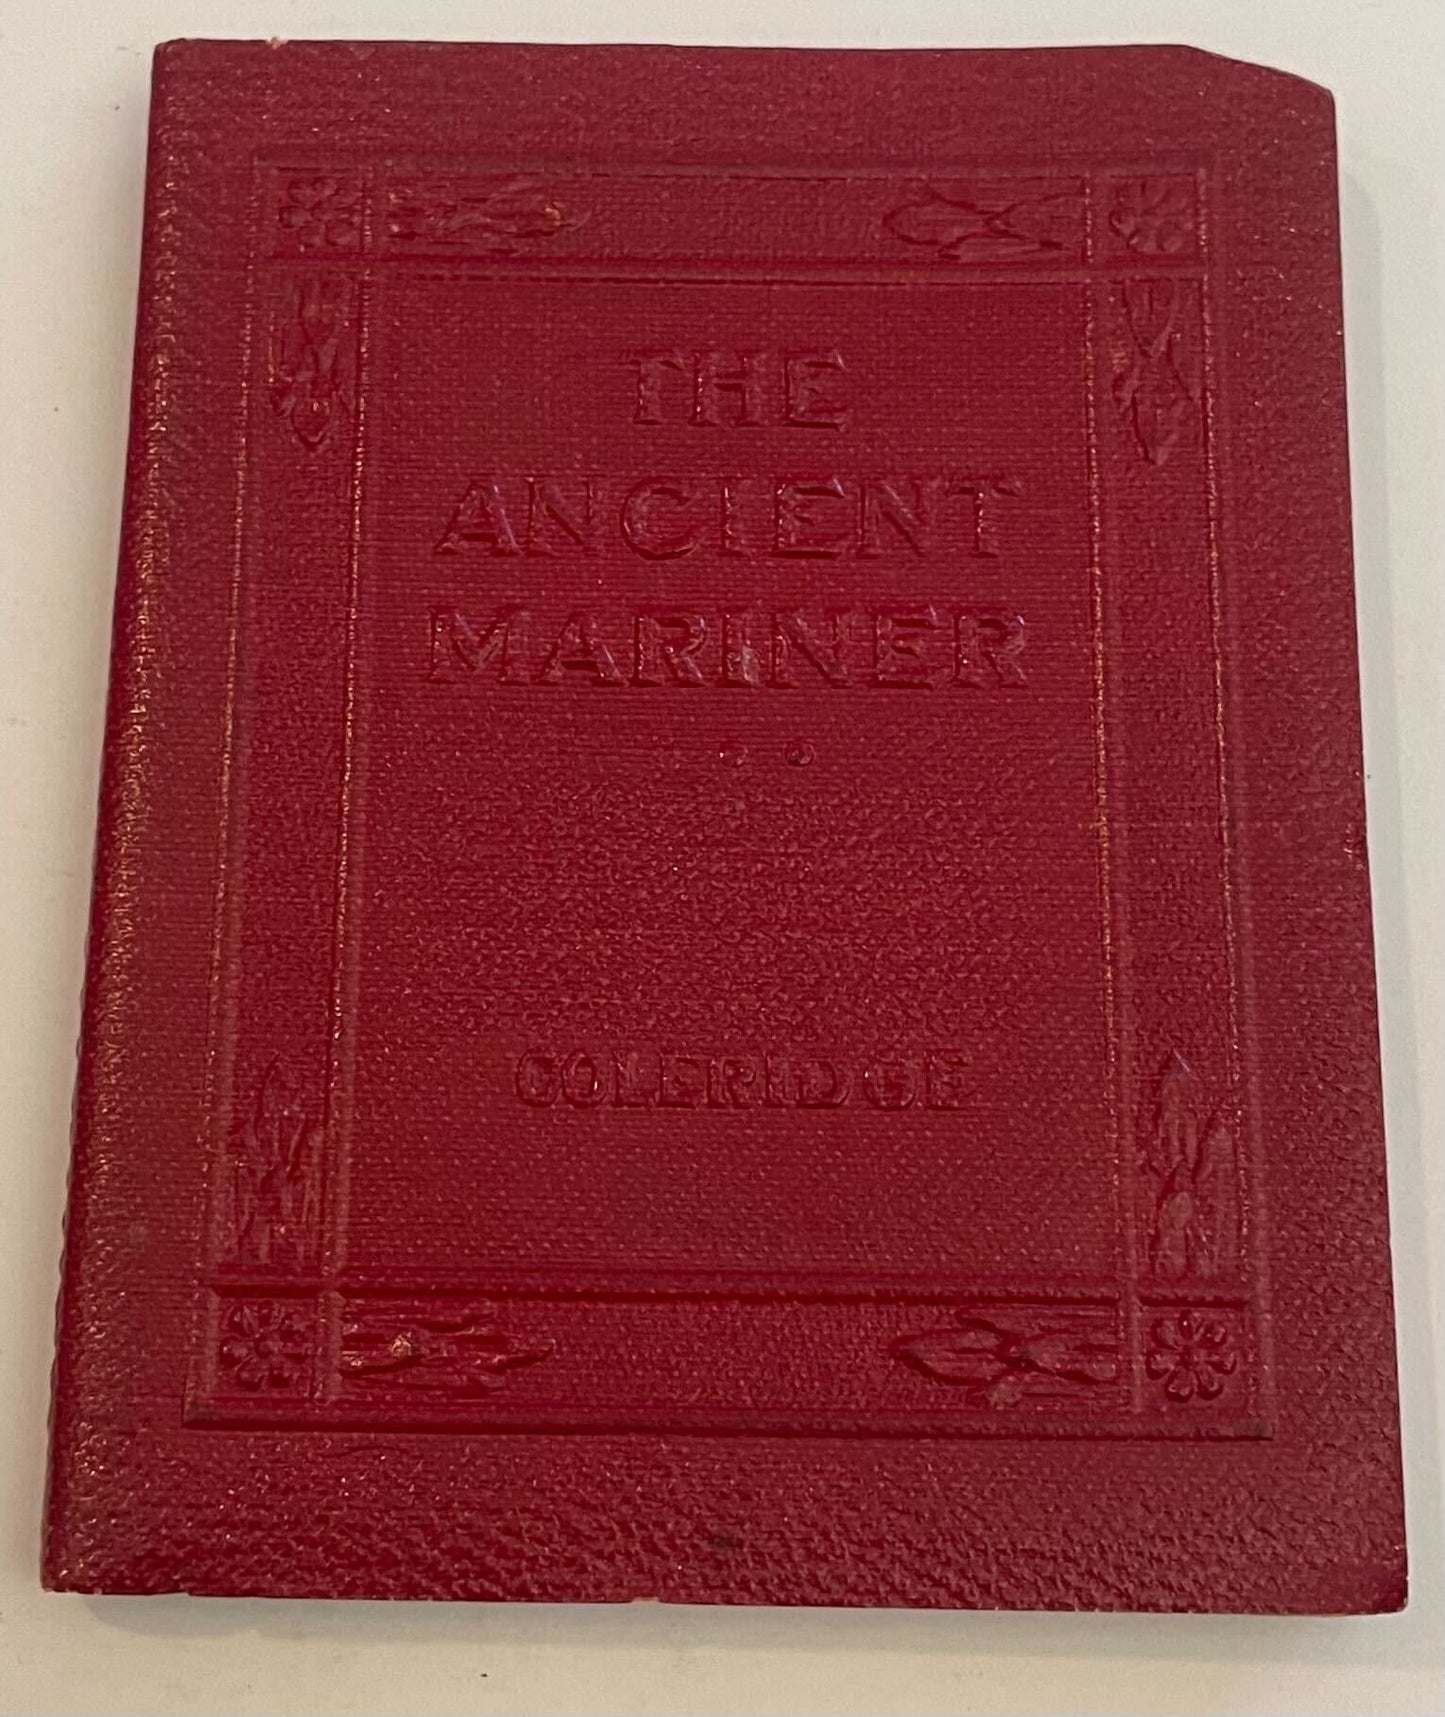 Vintage Red Books (Little Lunary Library)